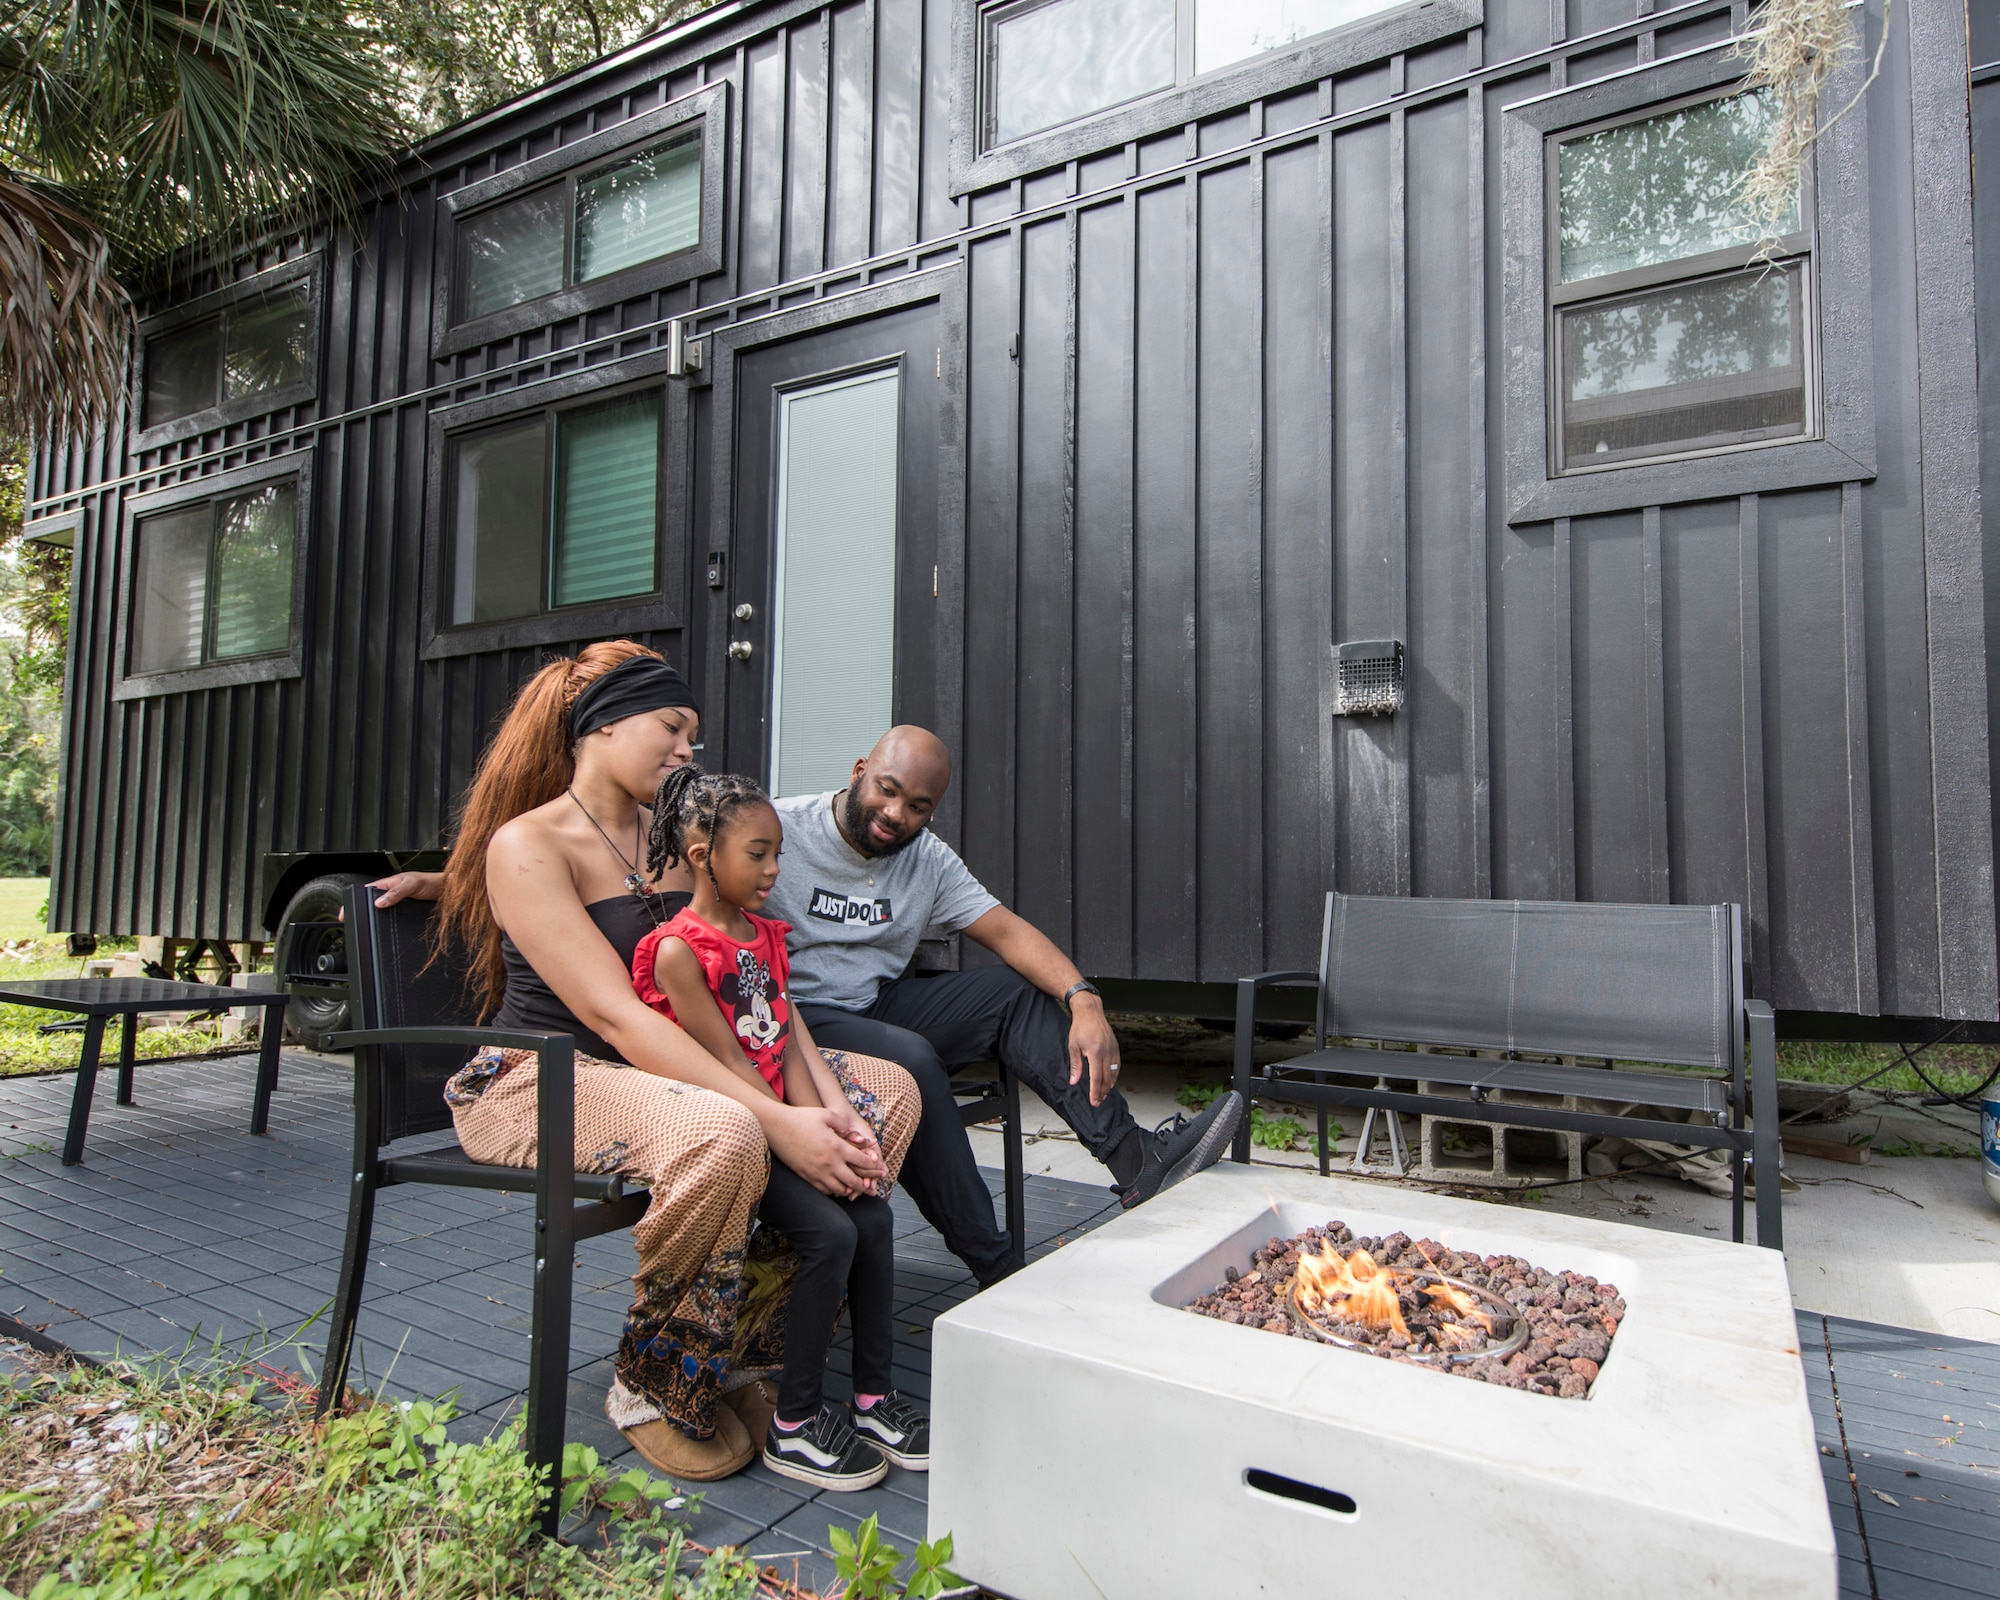 Staff Sgt. Kevin Inniss and his wife, Shanice, sit outside their recently completed Tiny Home with their 5-year-old daughter, Urie, in Cocoa, Fla.  Inniss is a computer knowledge manager with the 709th Cyberspace Squadron at Patrick AFB, Fla. (U.S. Air Force photo by Matthew S. Jurgens)